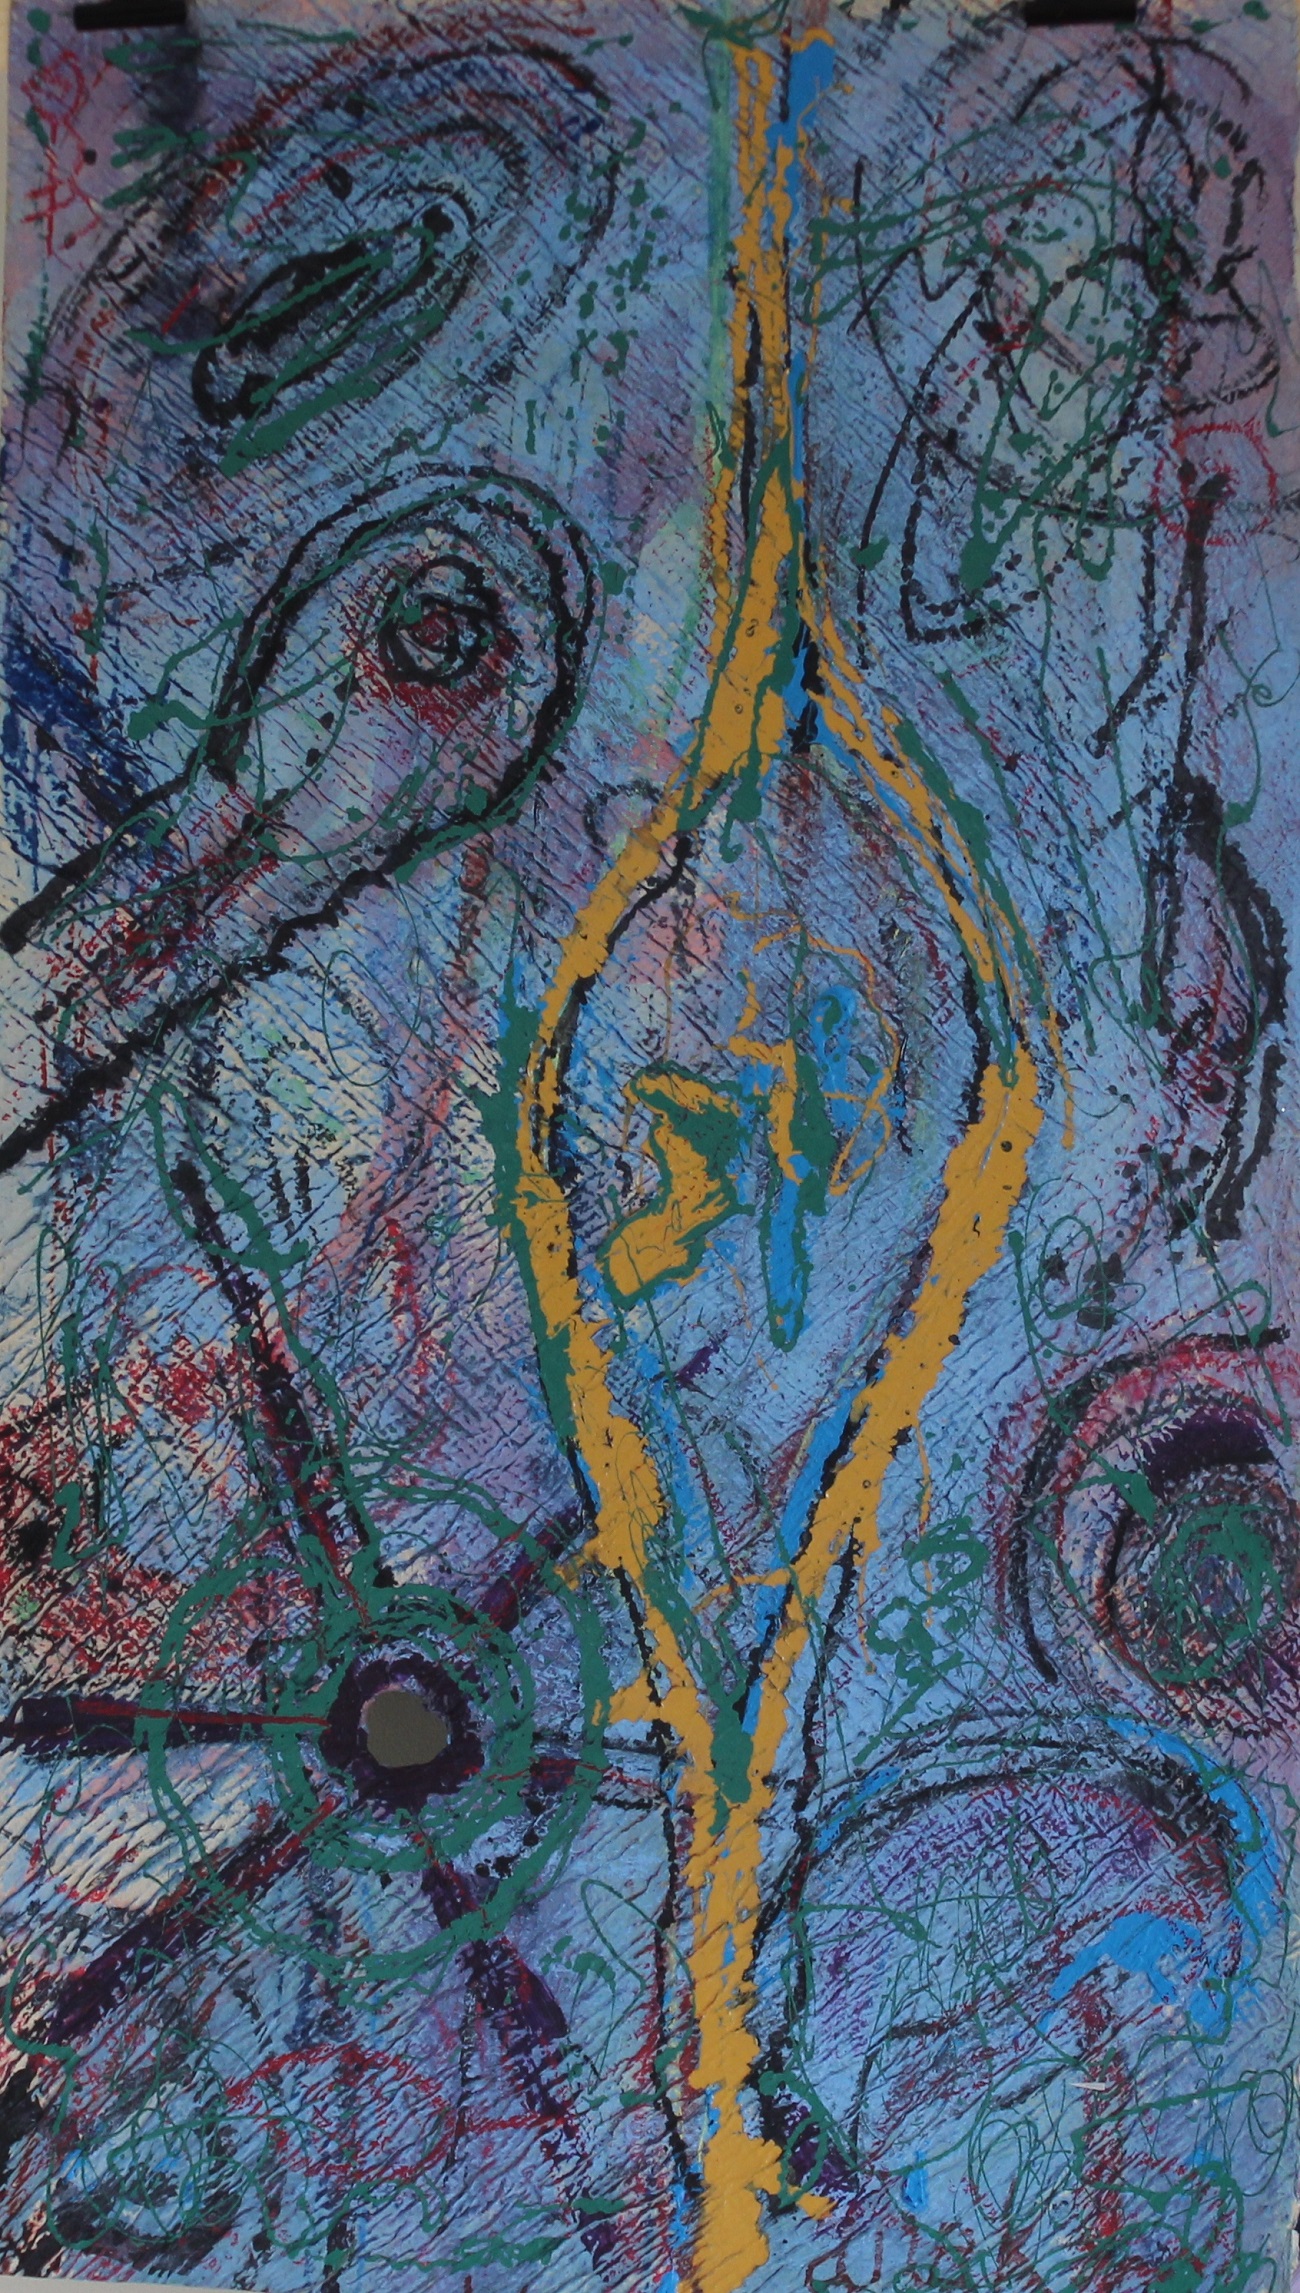 Untitled, 105x61 cm, mix media on Indian paper, 2000